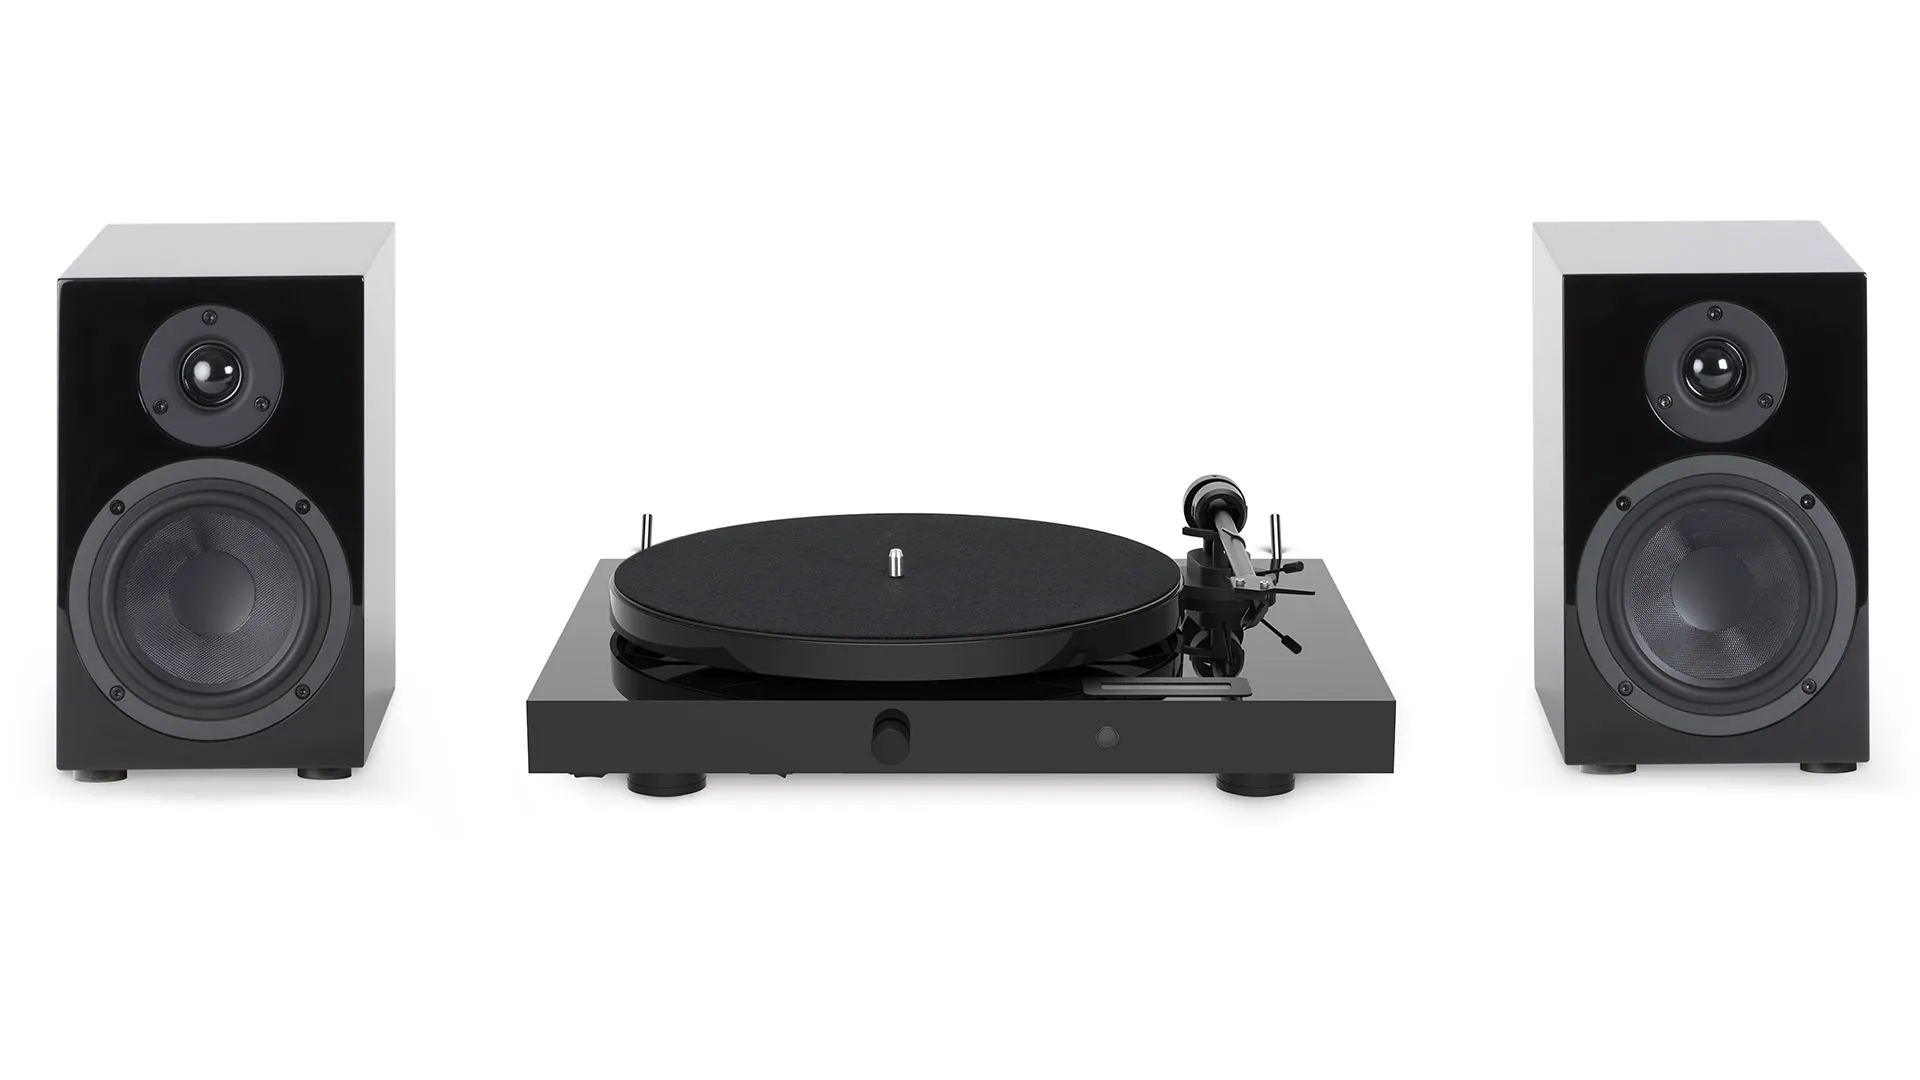 Pro-Ject Juke Box E1 Stereo Hi-Fi Set in Gloss Black - Includes Turntable, Phono Preamp, Receiver and Speakers